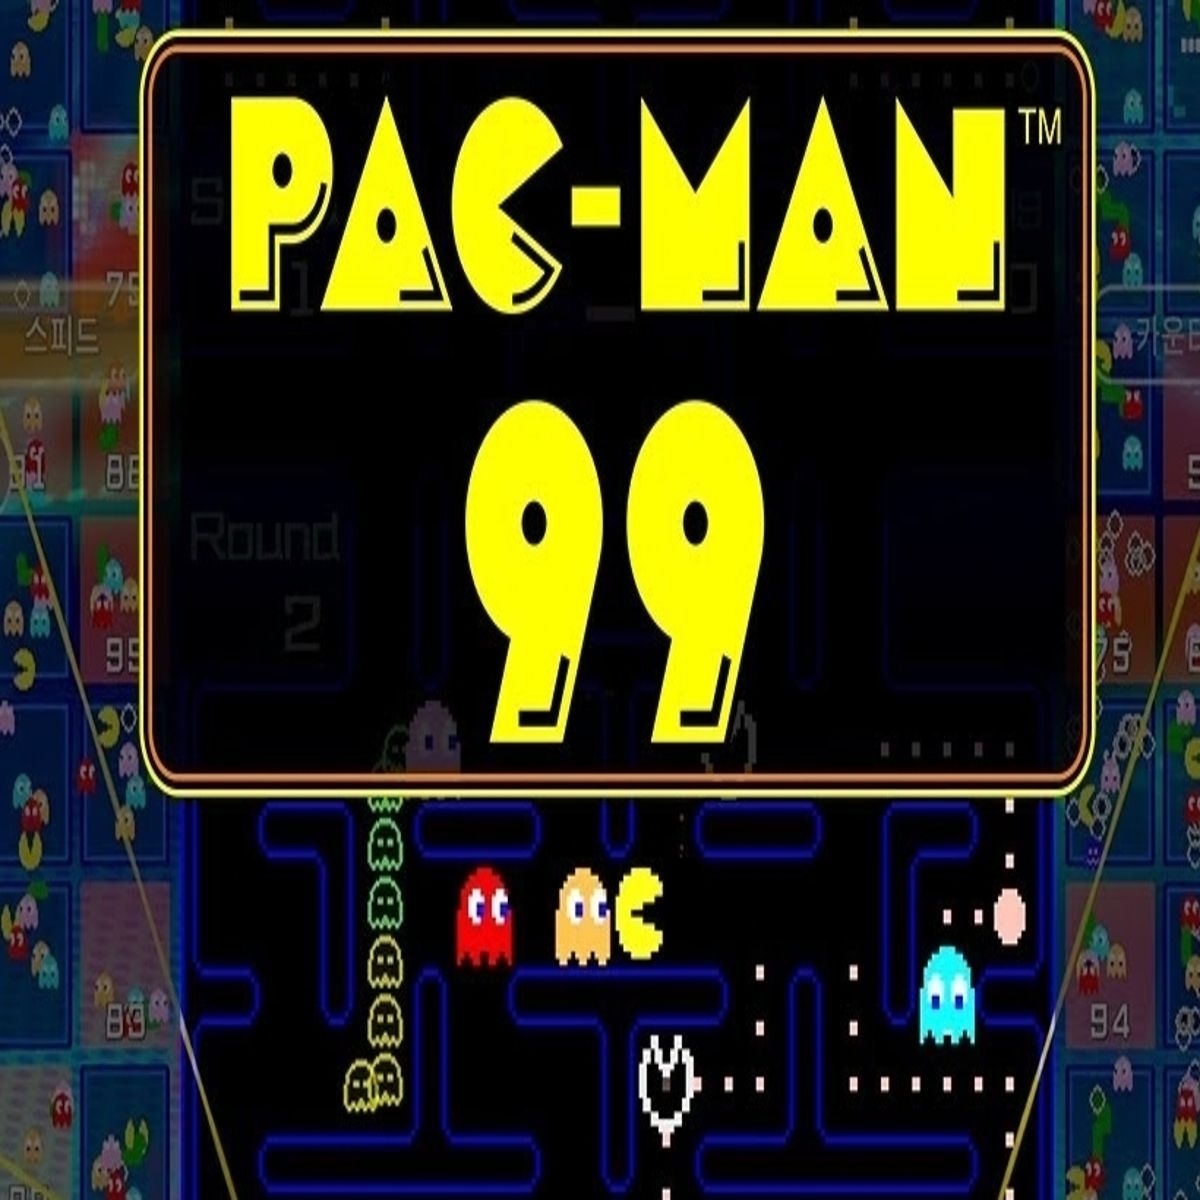 PAC-MAN 99 Available Now on Nintendo Switch